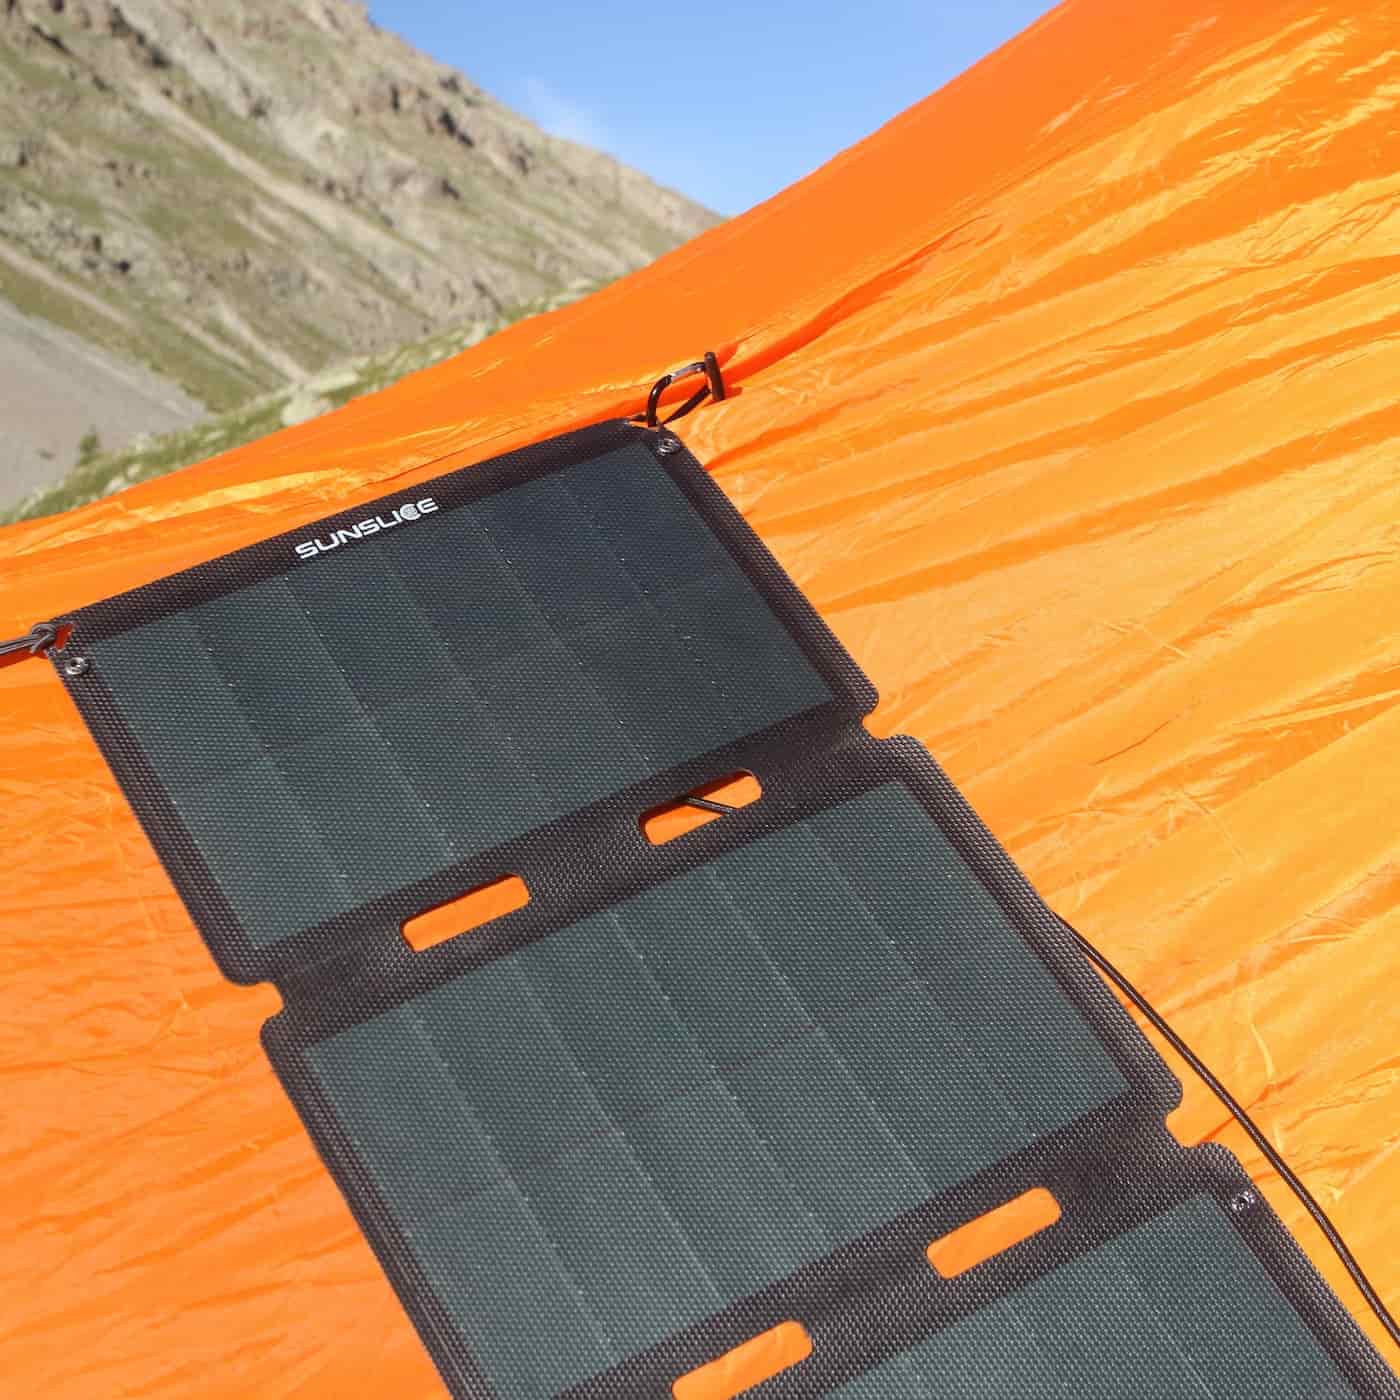 portable solar panel for camping attached to a tent on a sunny mountain